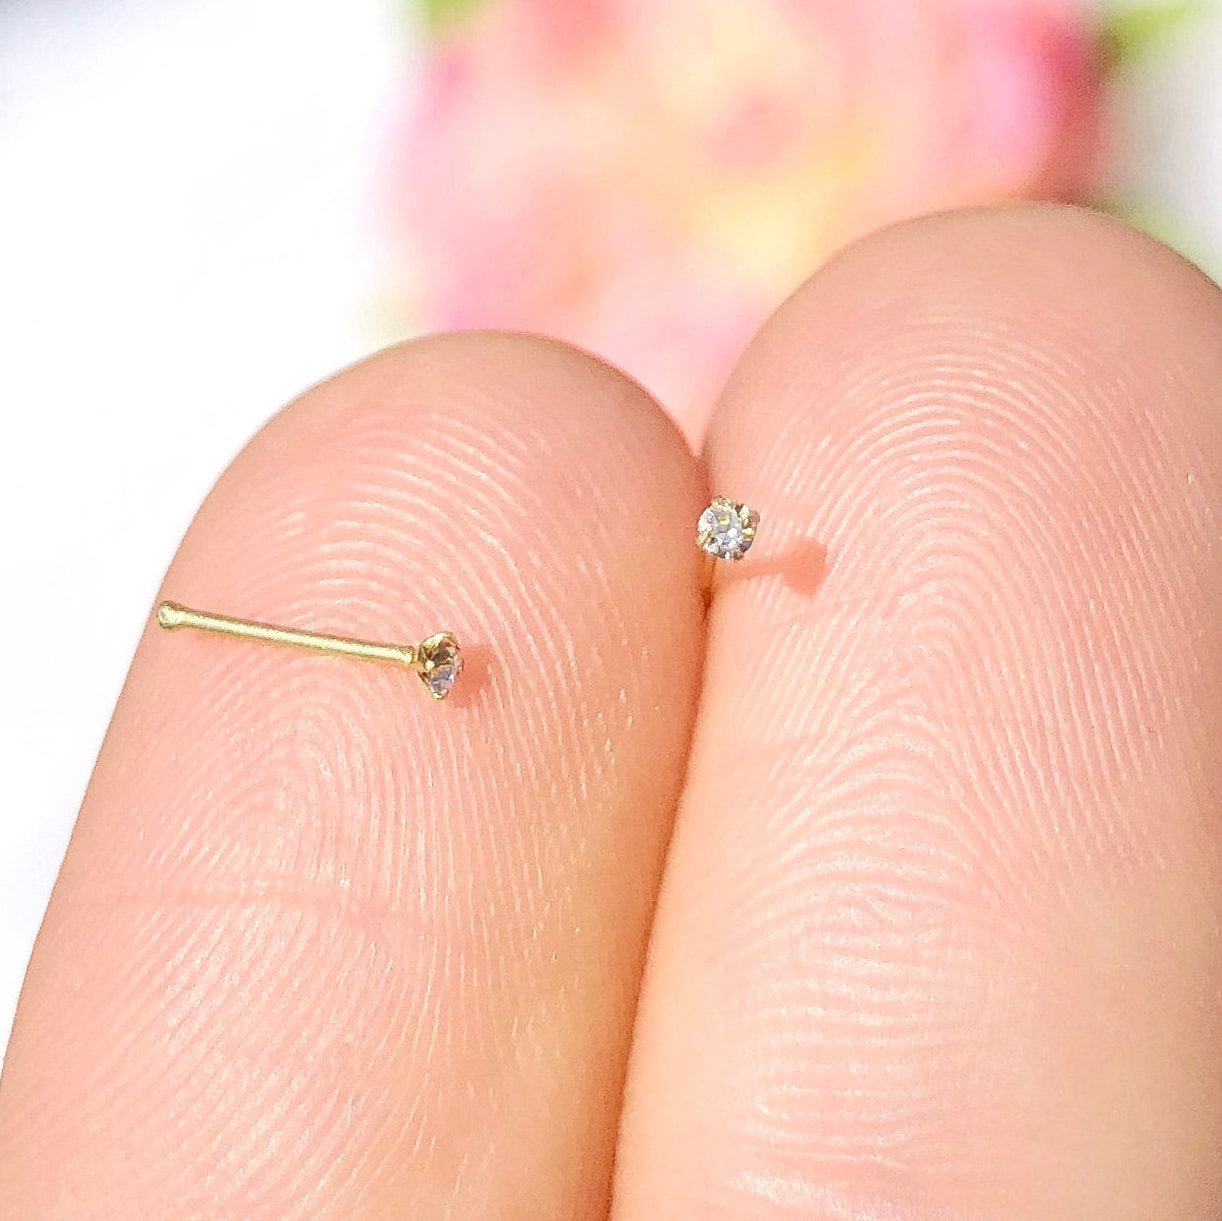 TINY Gold Nose Ring Stud Nose Piercing L Shaped Nose Ring Stud - Etsy